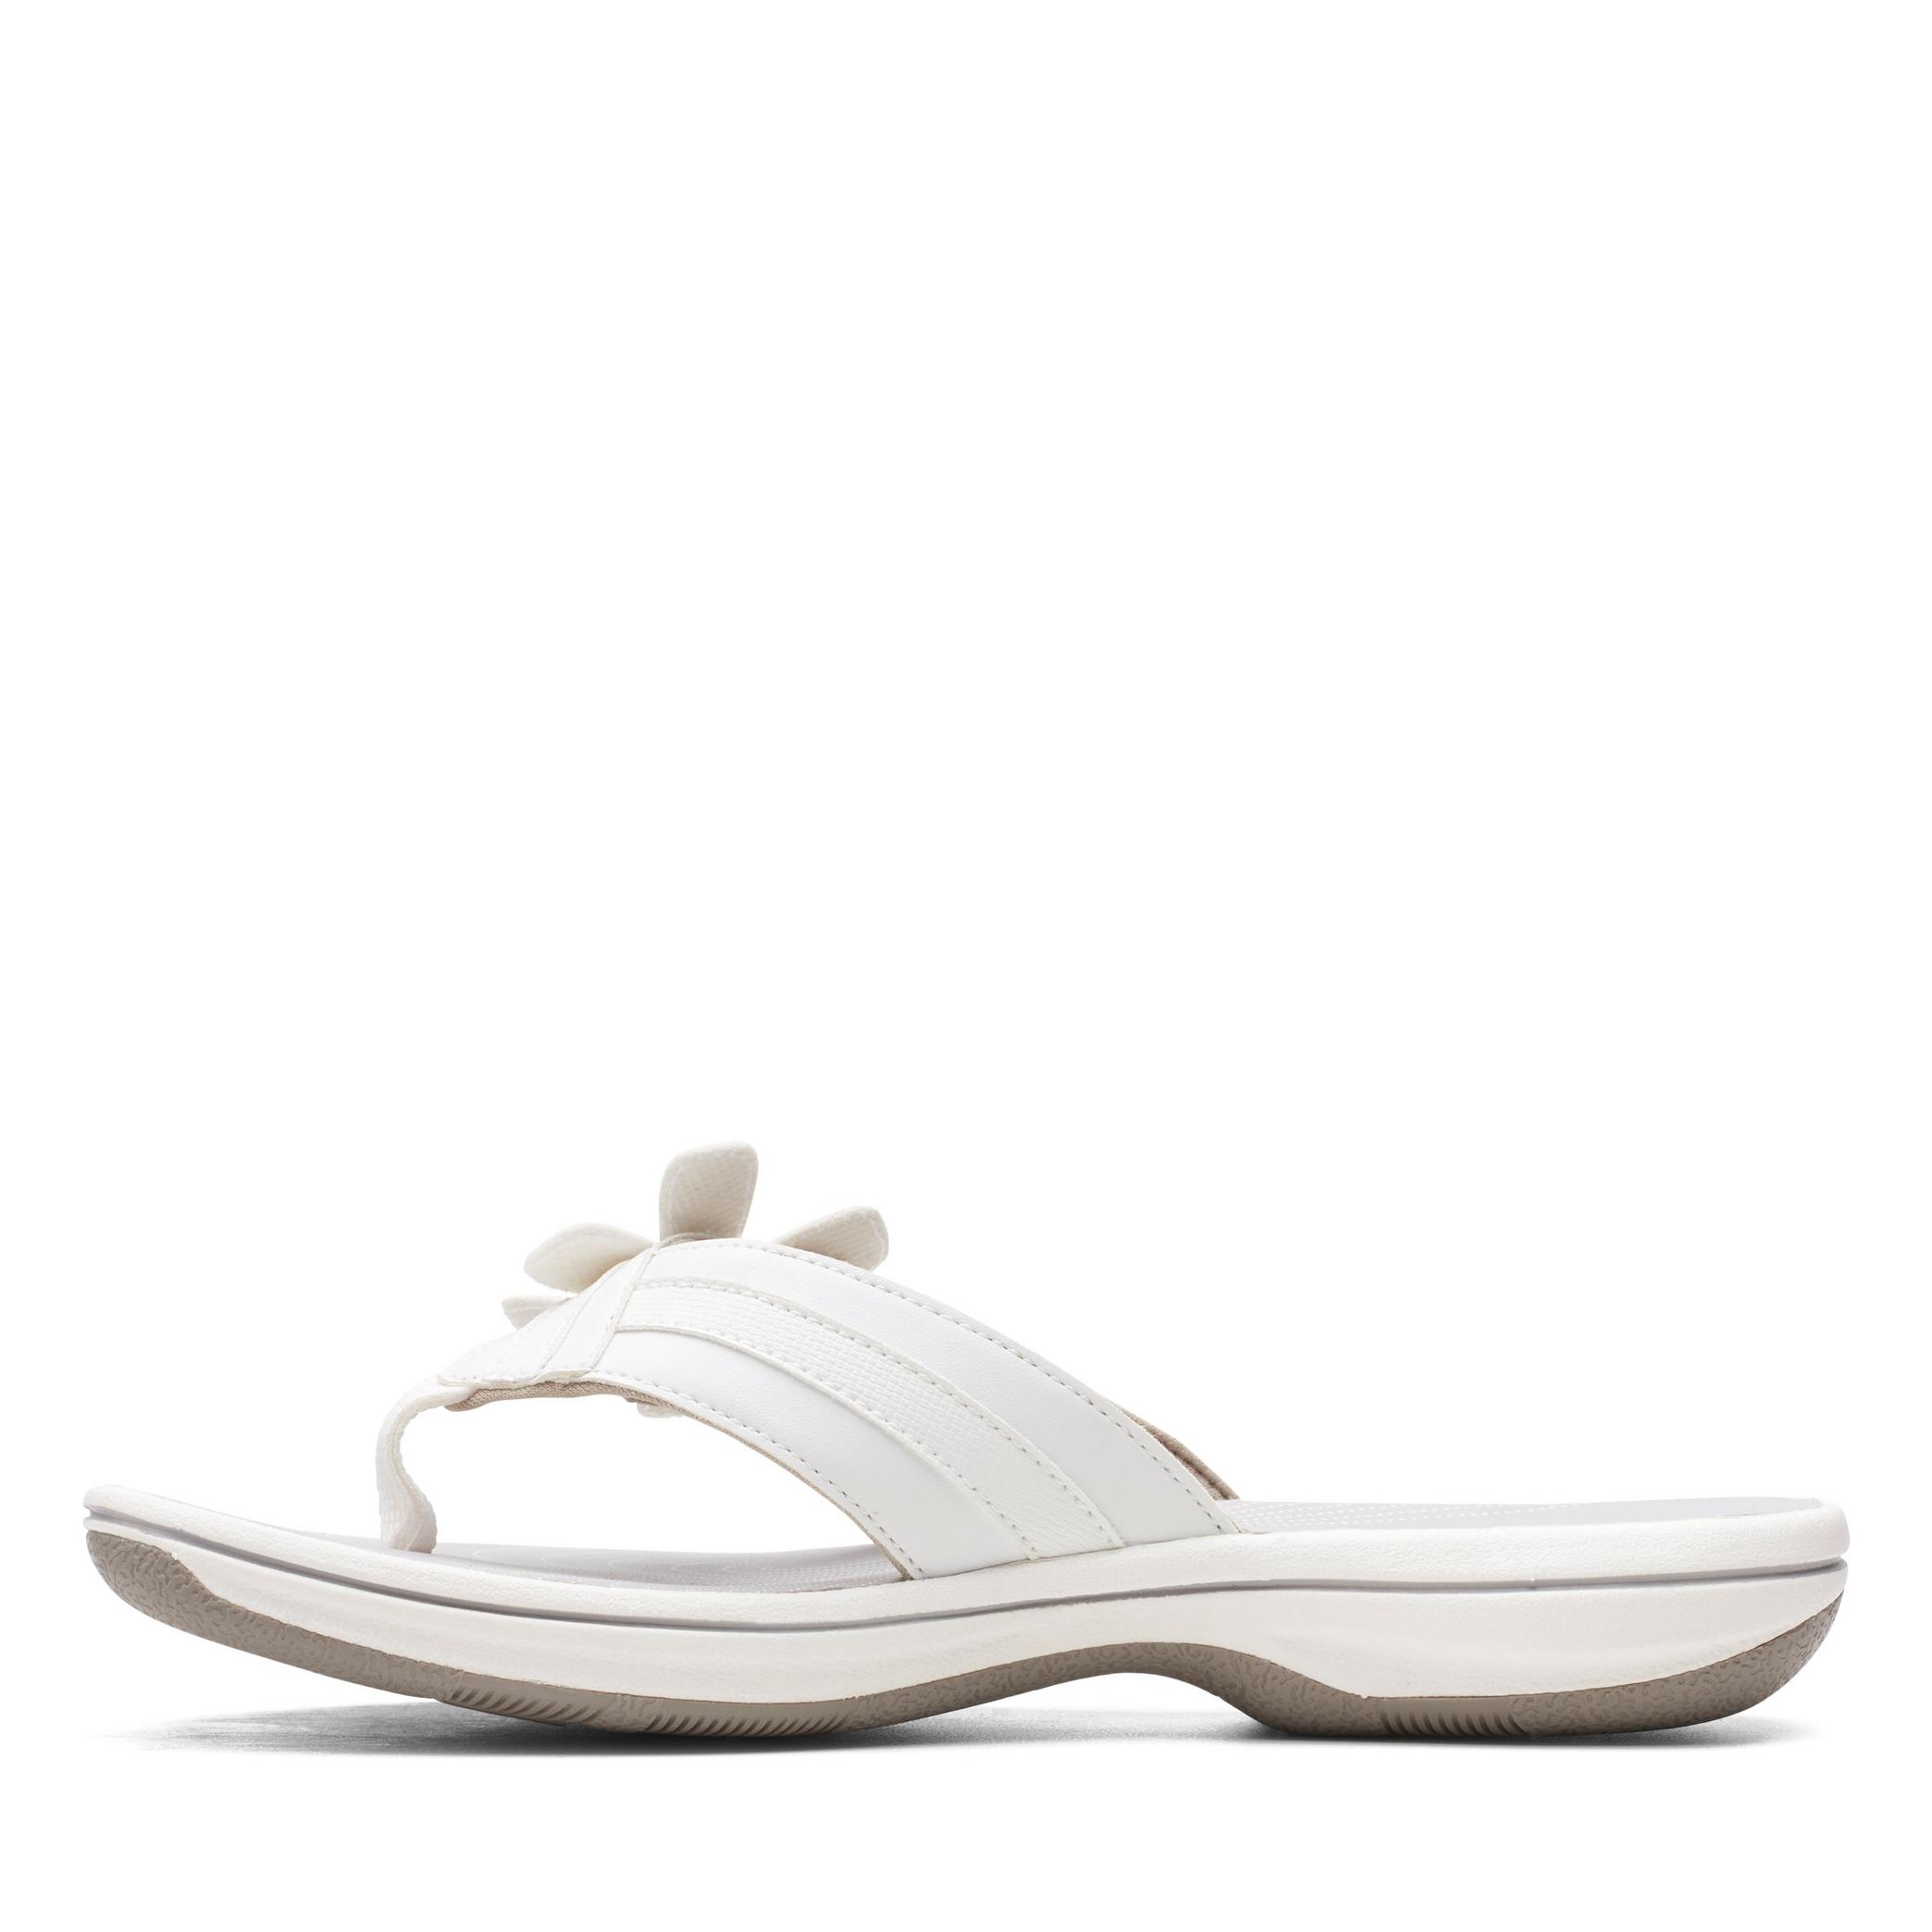 Brinkley Flora White Flat Sandals, view 5 of 7